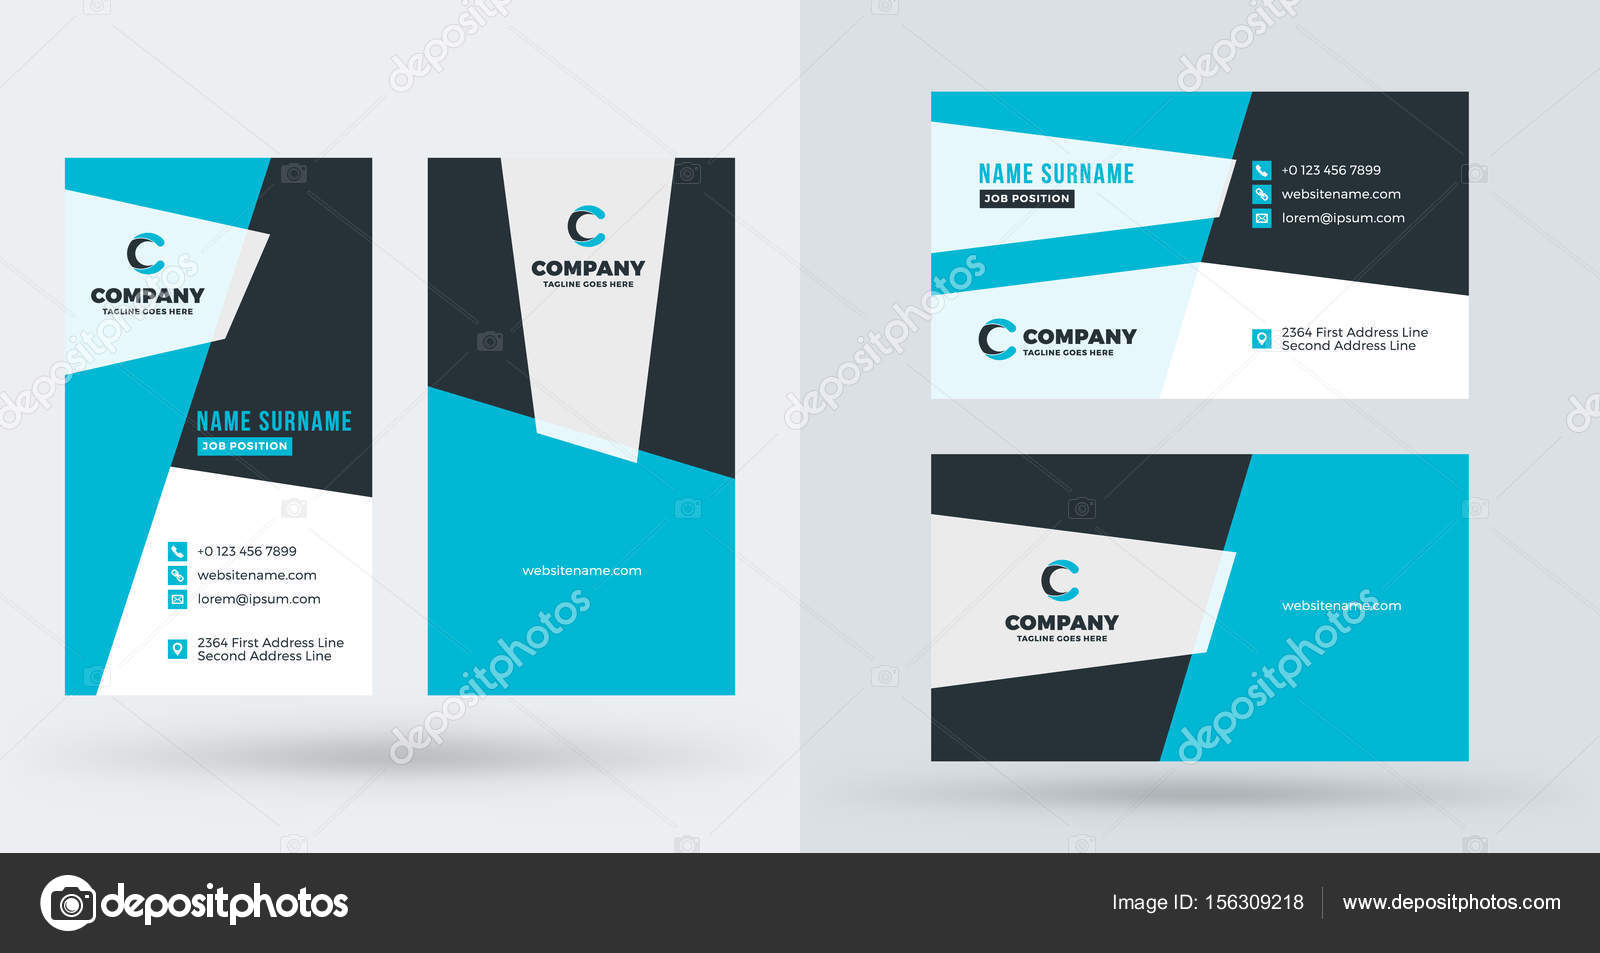 Double Sided Business Card Template Illustrator from st3.depositphotos.com